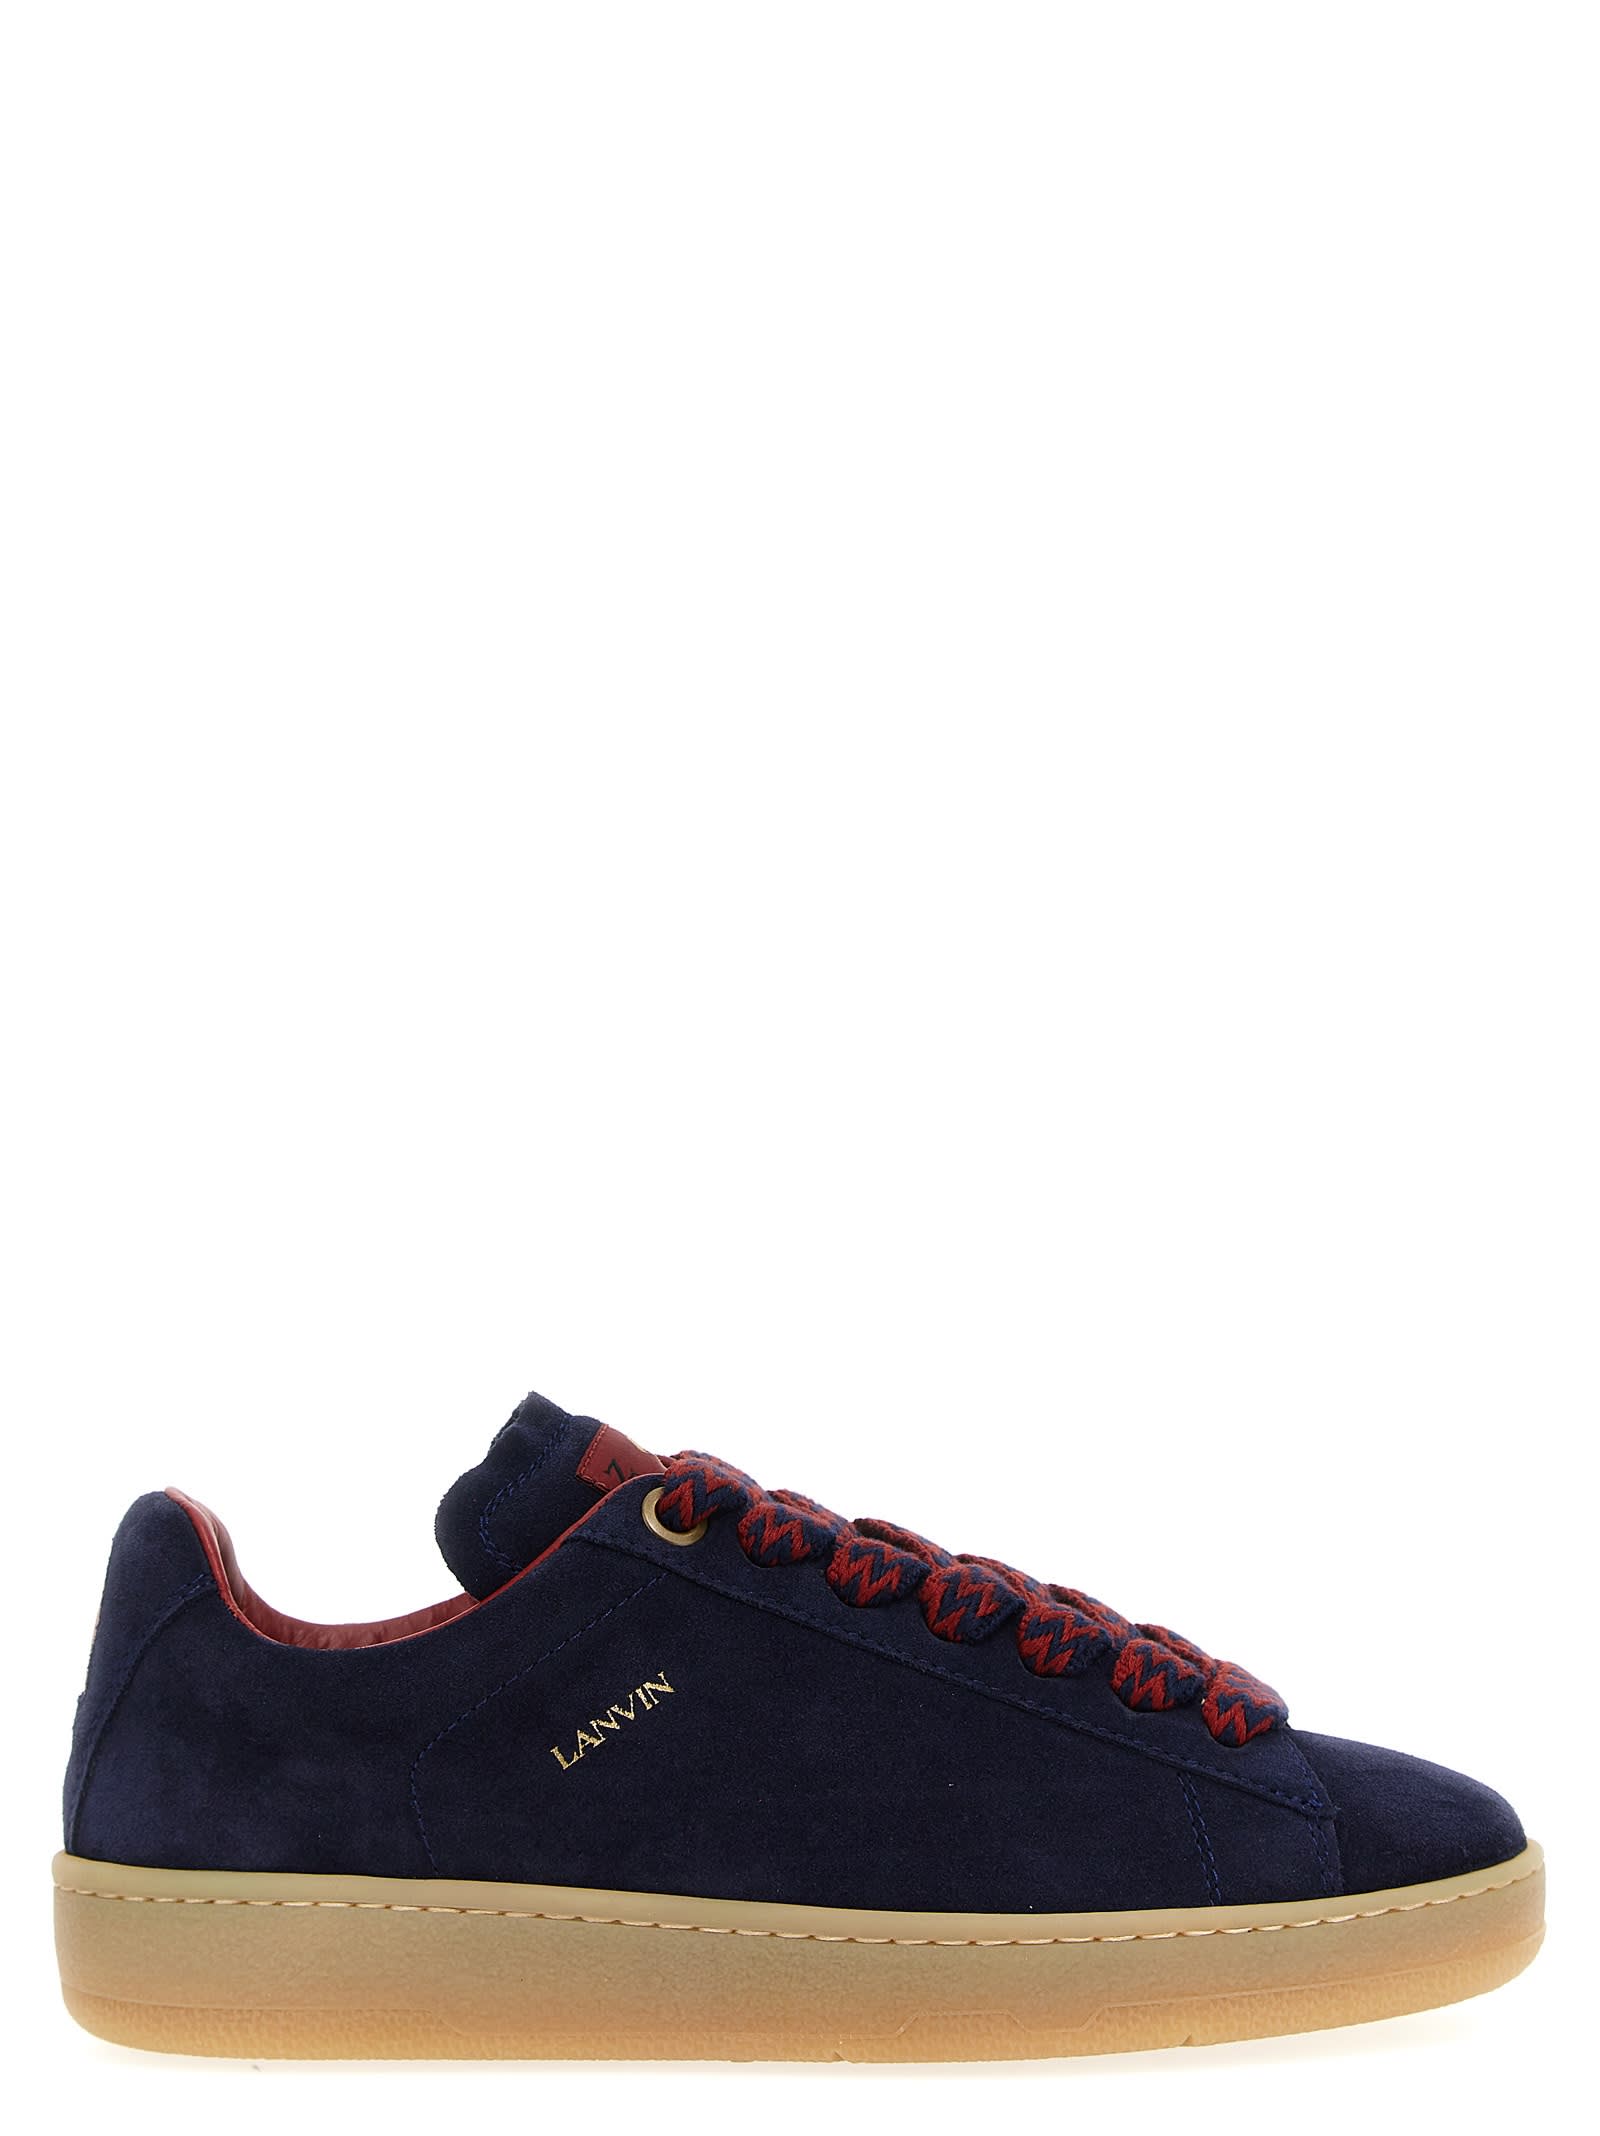 Lanvin Lite Curb Sneakers In Navy Blue/red